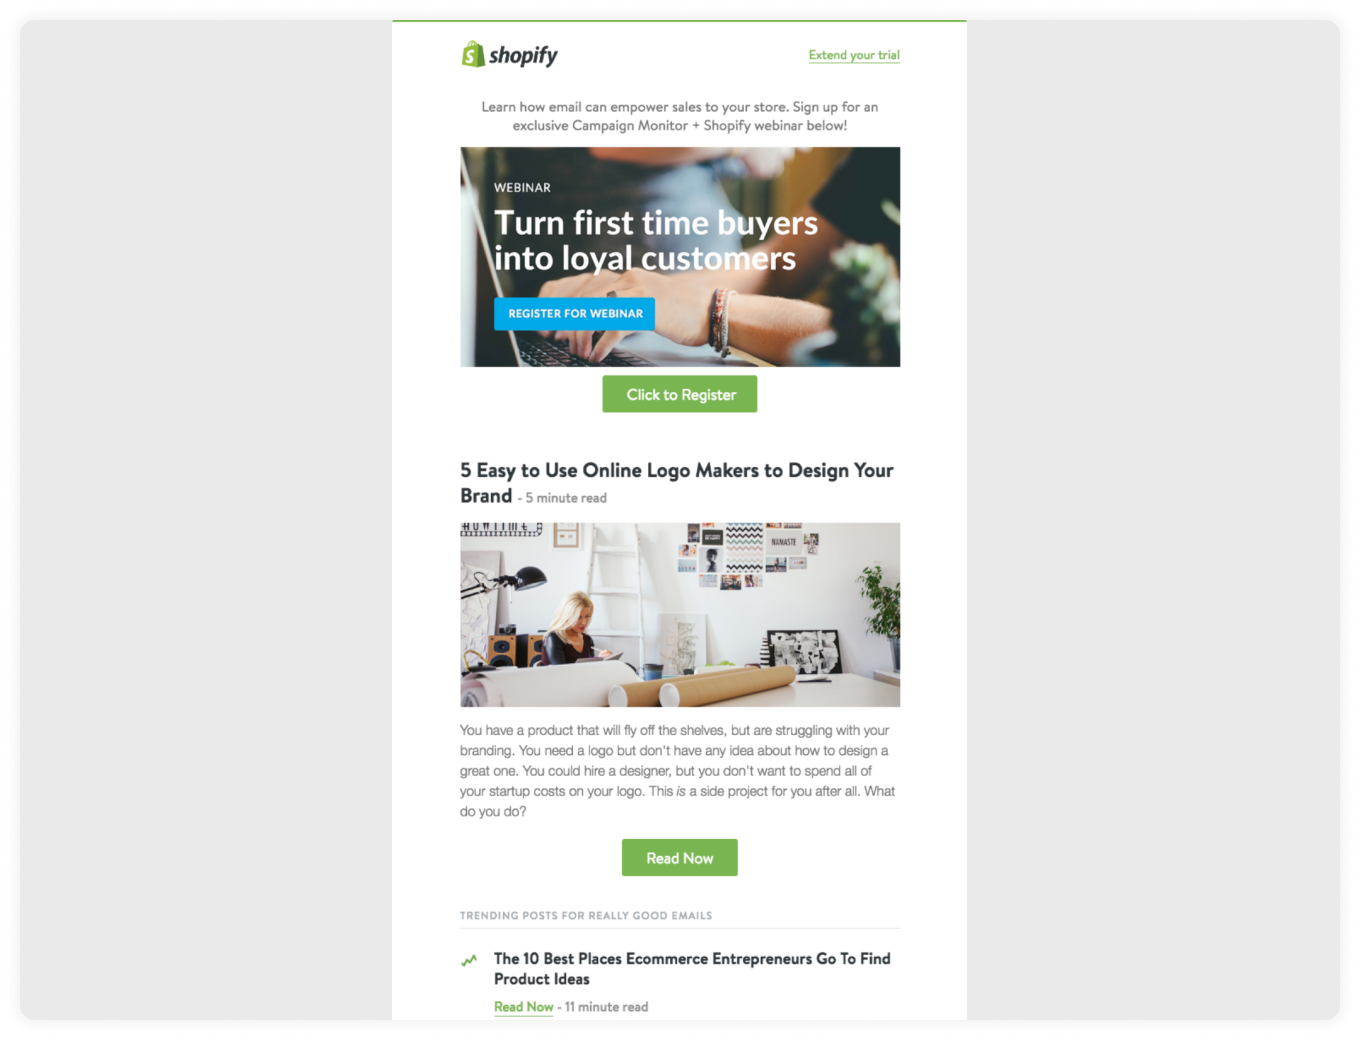 Shopify's email inviting businesses to attend webinar